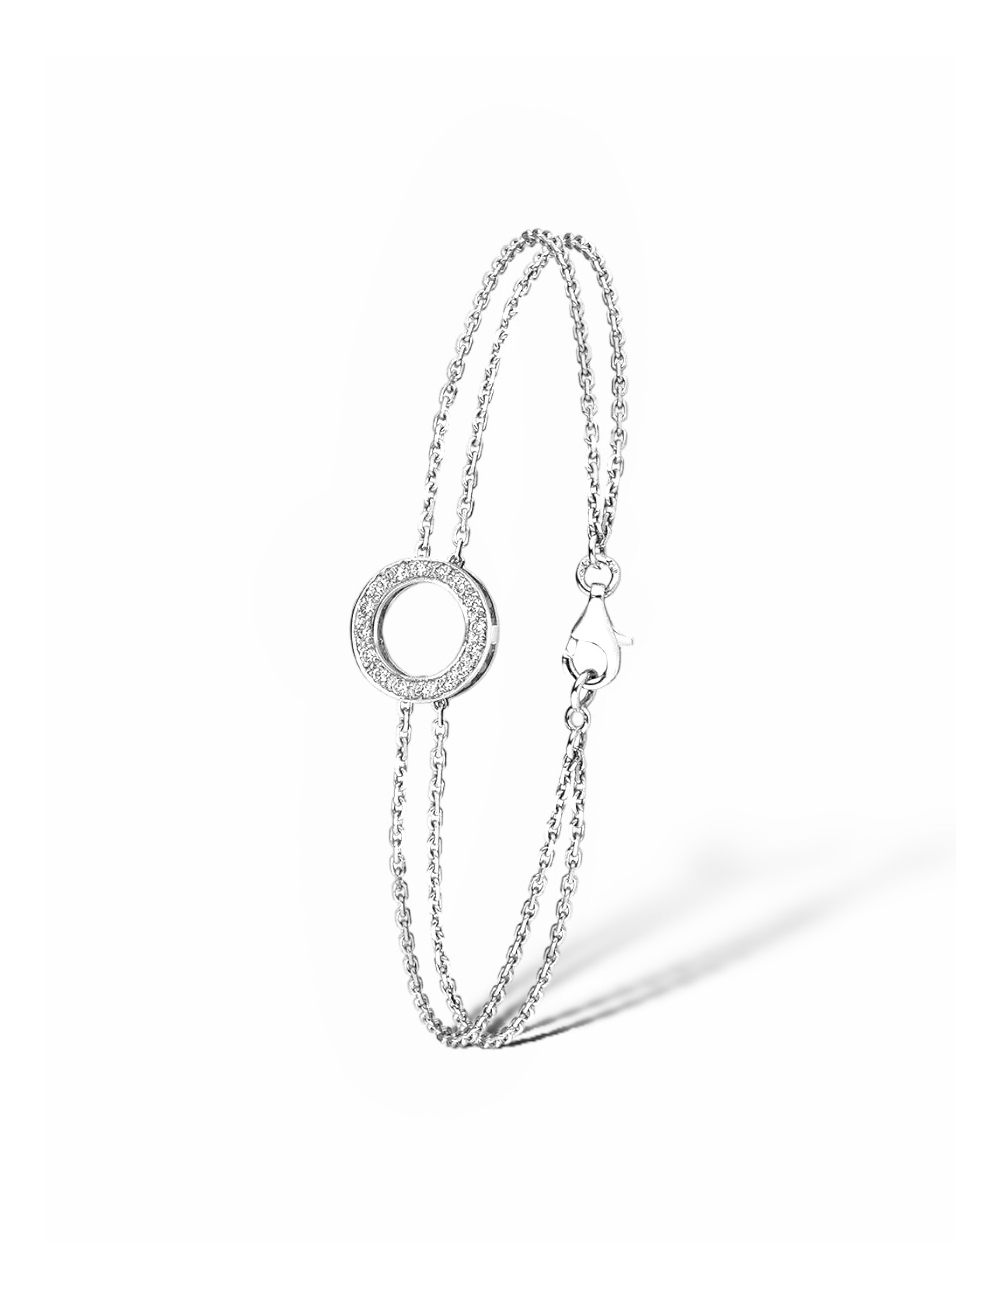 A women's circular bracelet made of 750 white gold and embellished with white diamonds